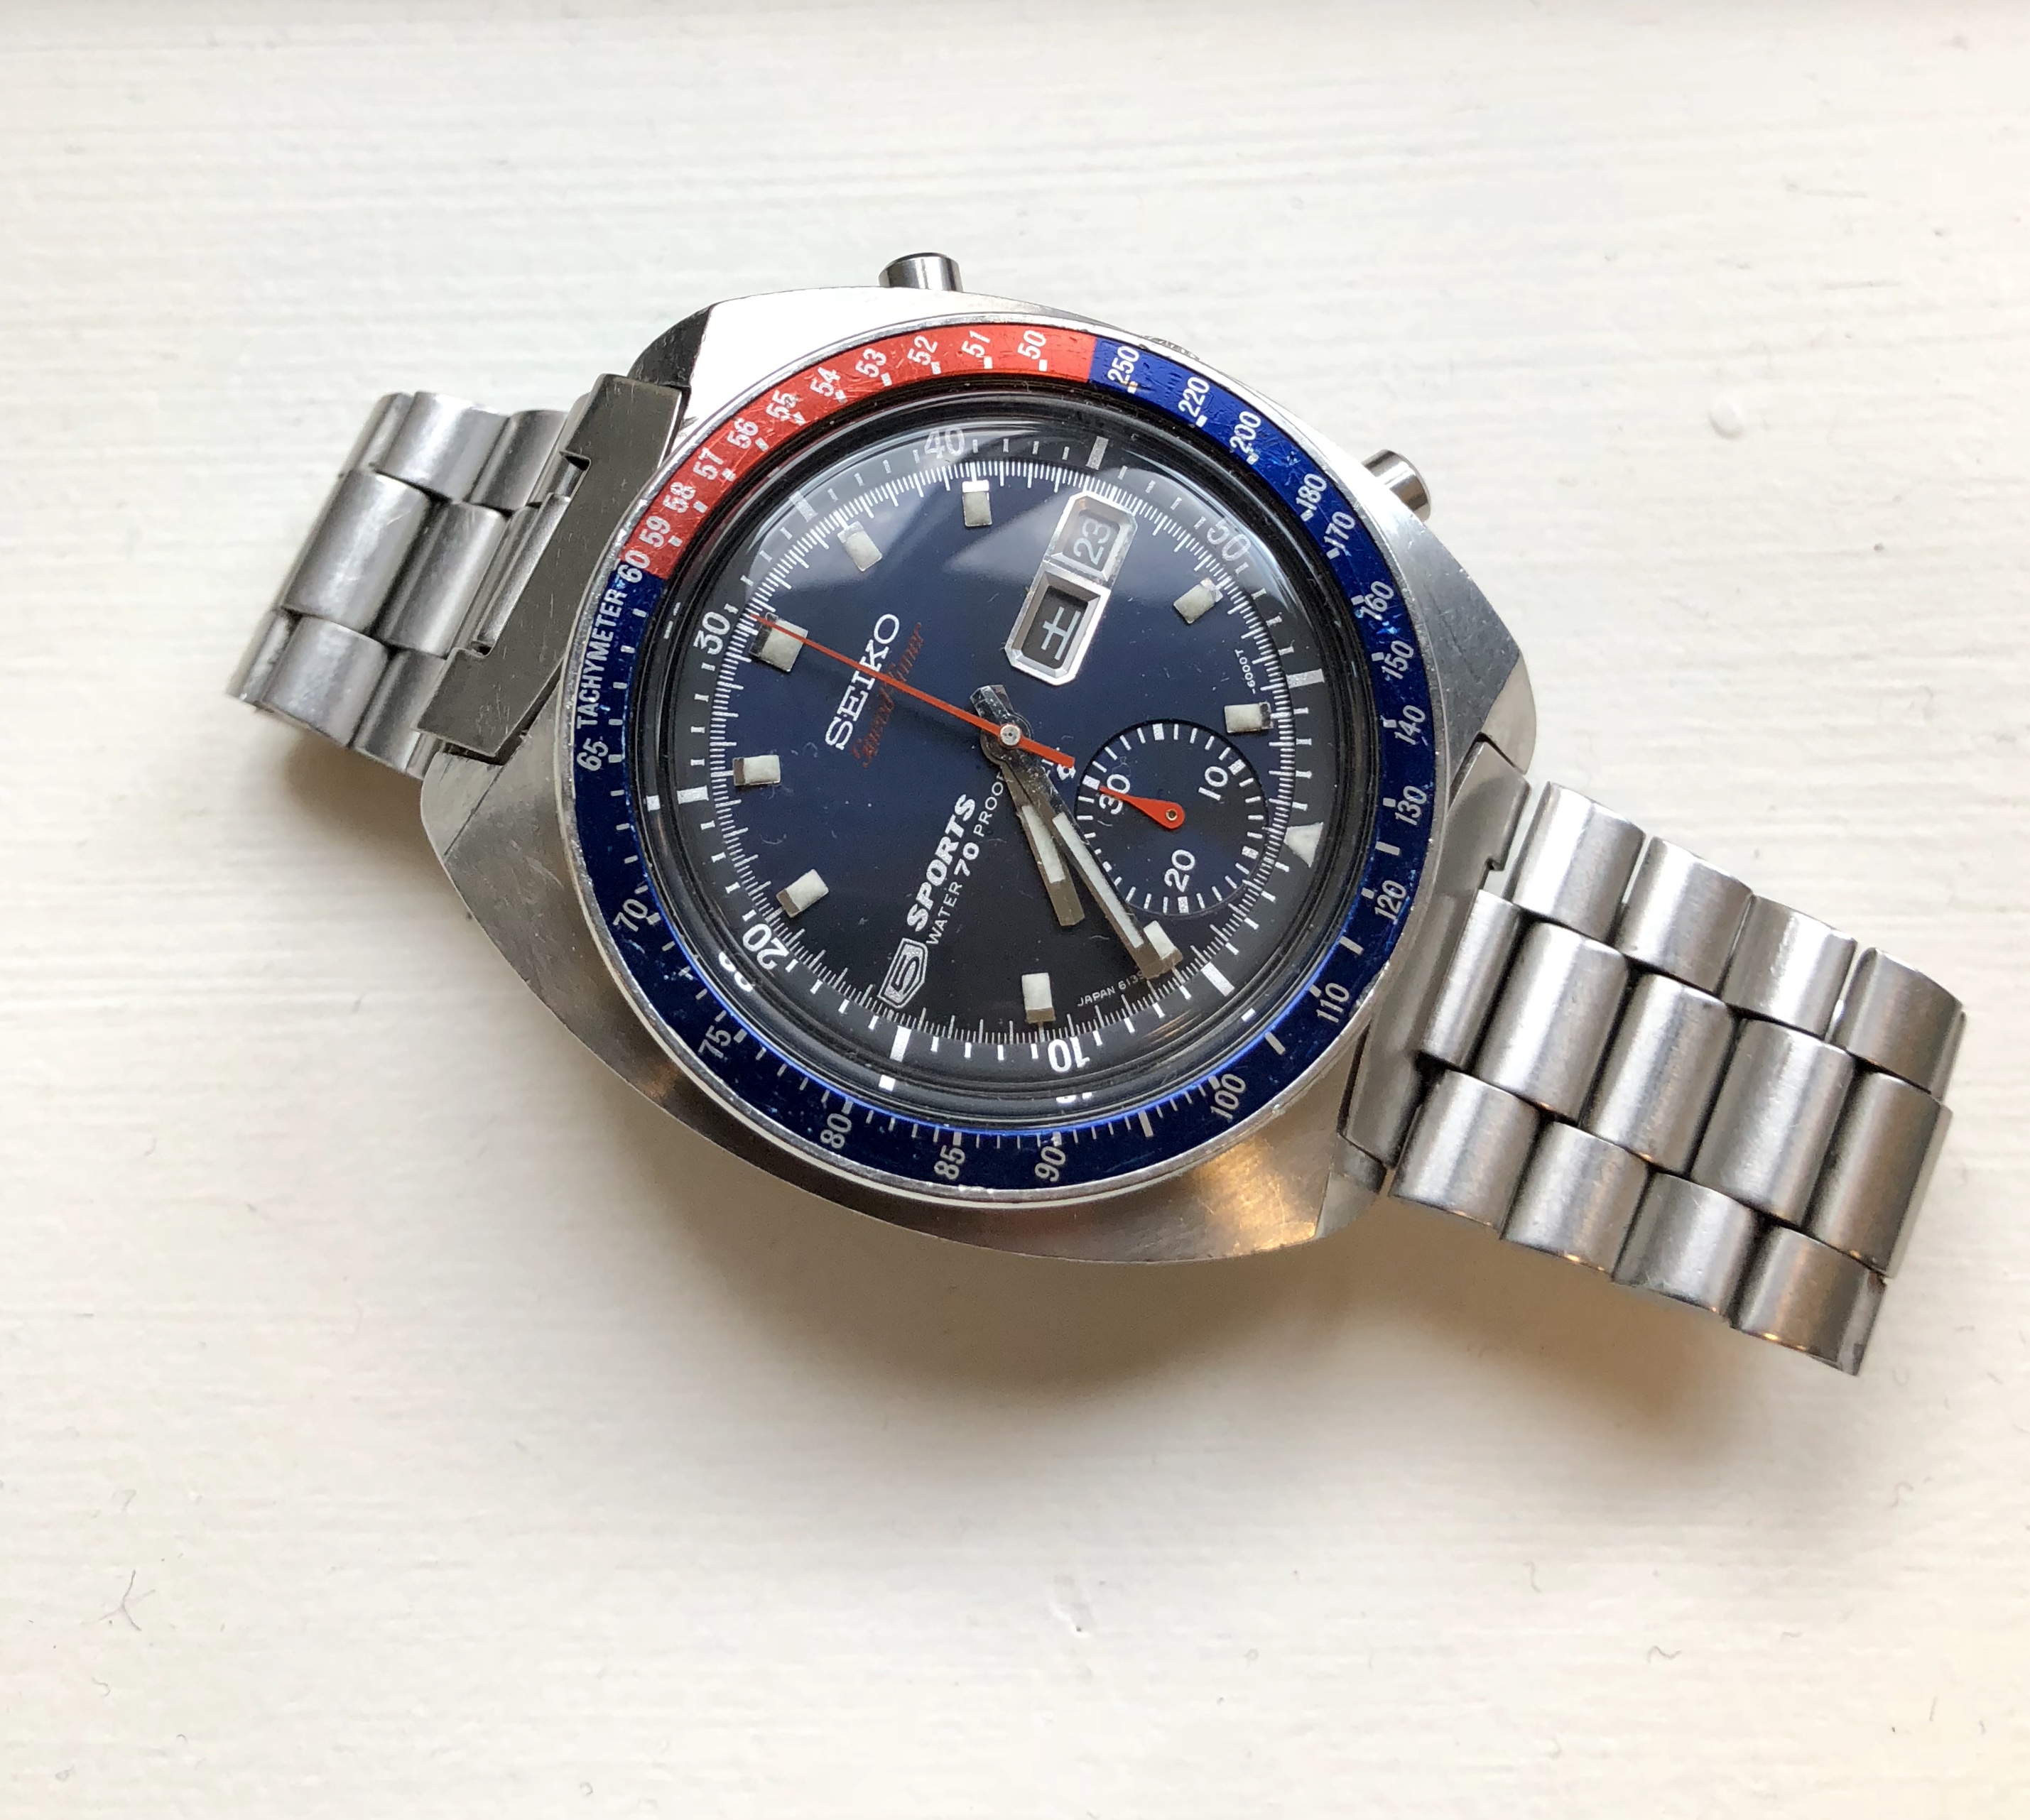 SOLD - 1969 JDM Seiko 6139-6000 Speed-Timer (Pogue) - “Proof” dial, notch  case | Omega Forums